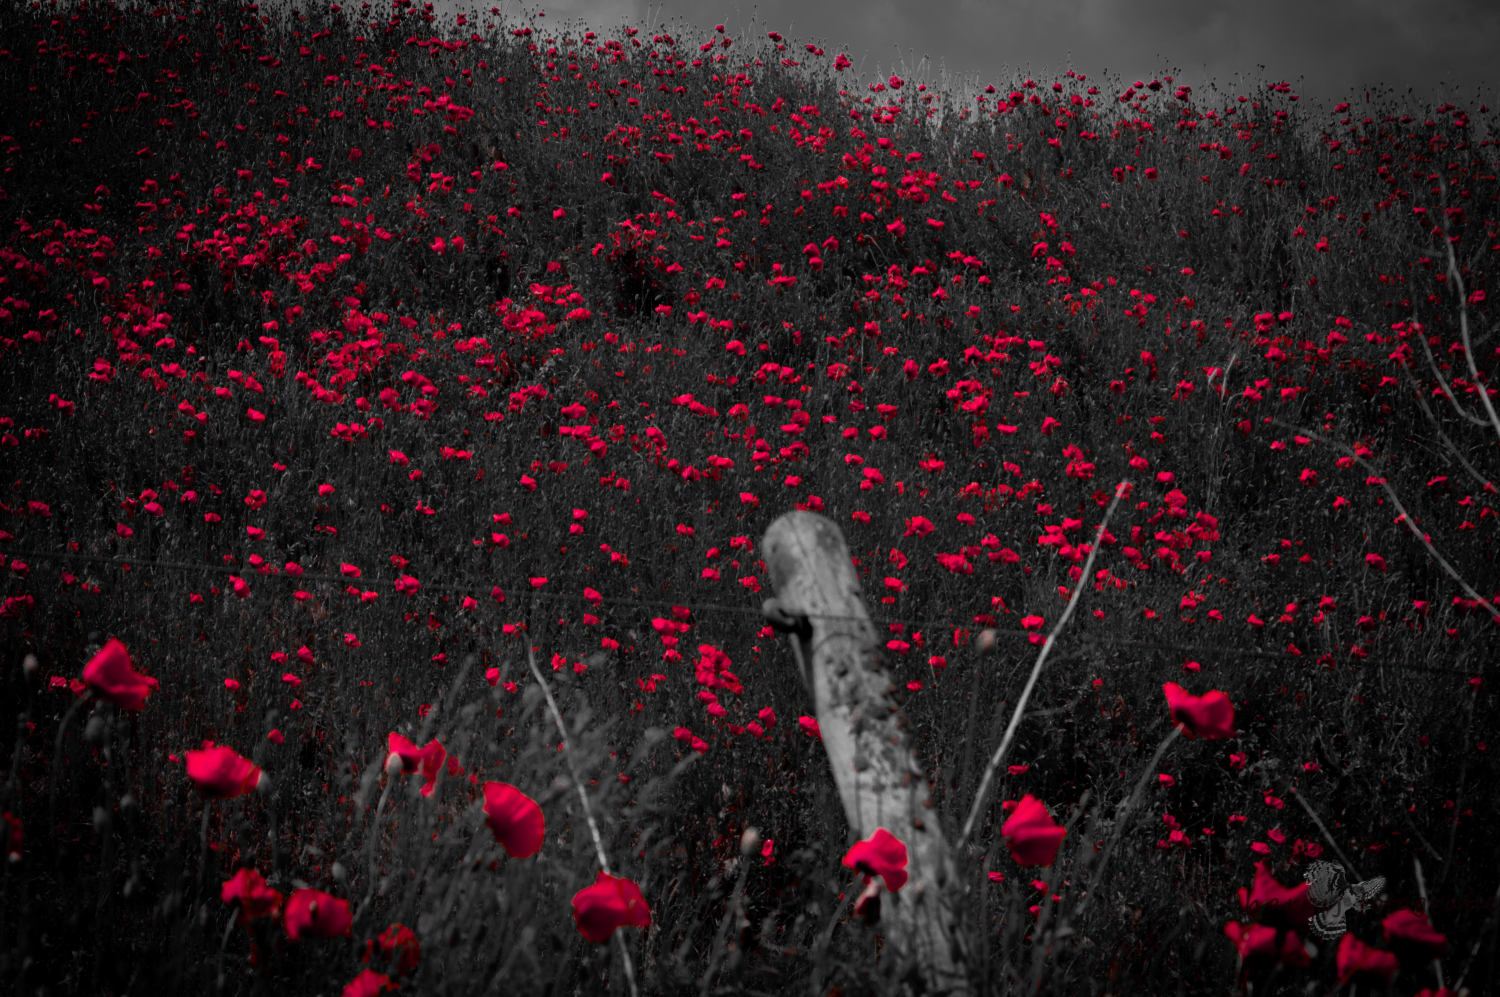 In Flanders fields the poppies blow. This site always make me think about the great Sacrifice people from all sides made in ww1 so we could live in peace, or so they hoped...